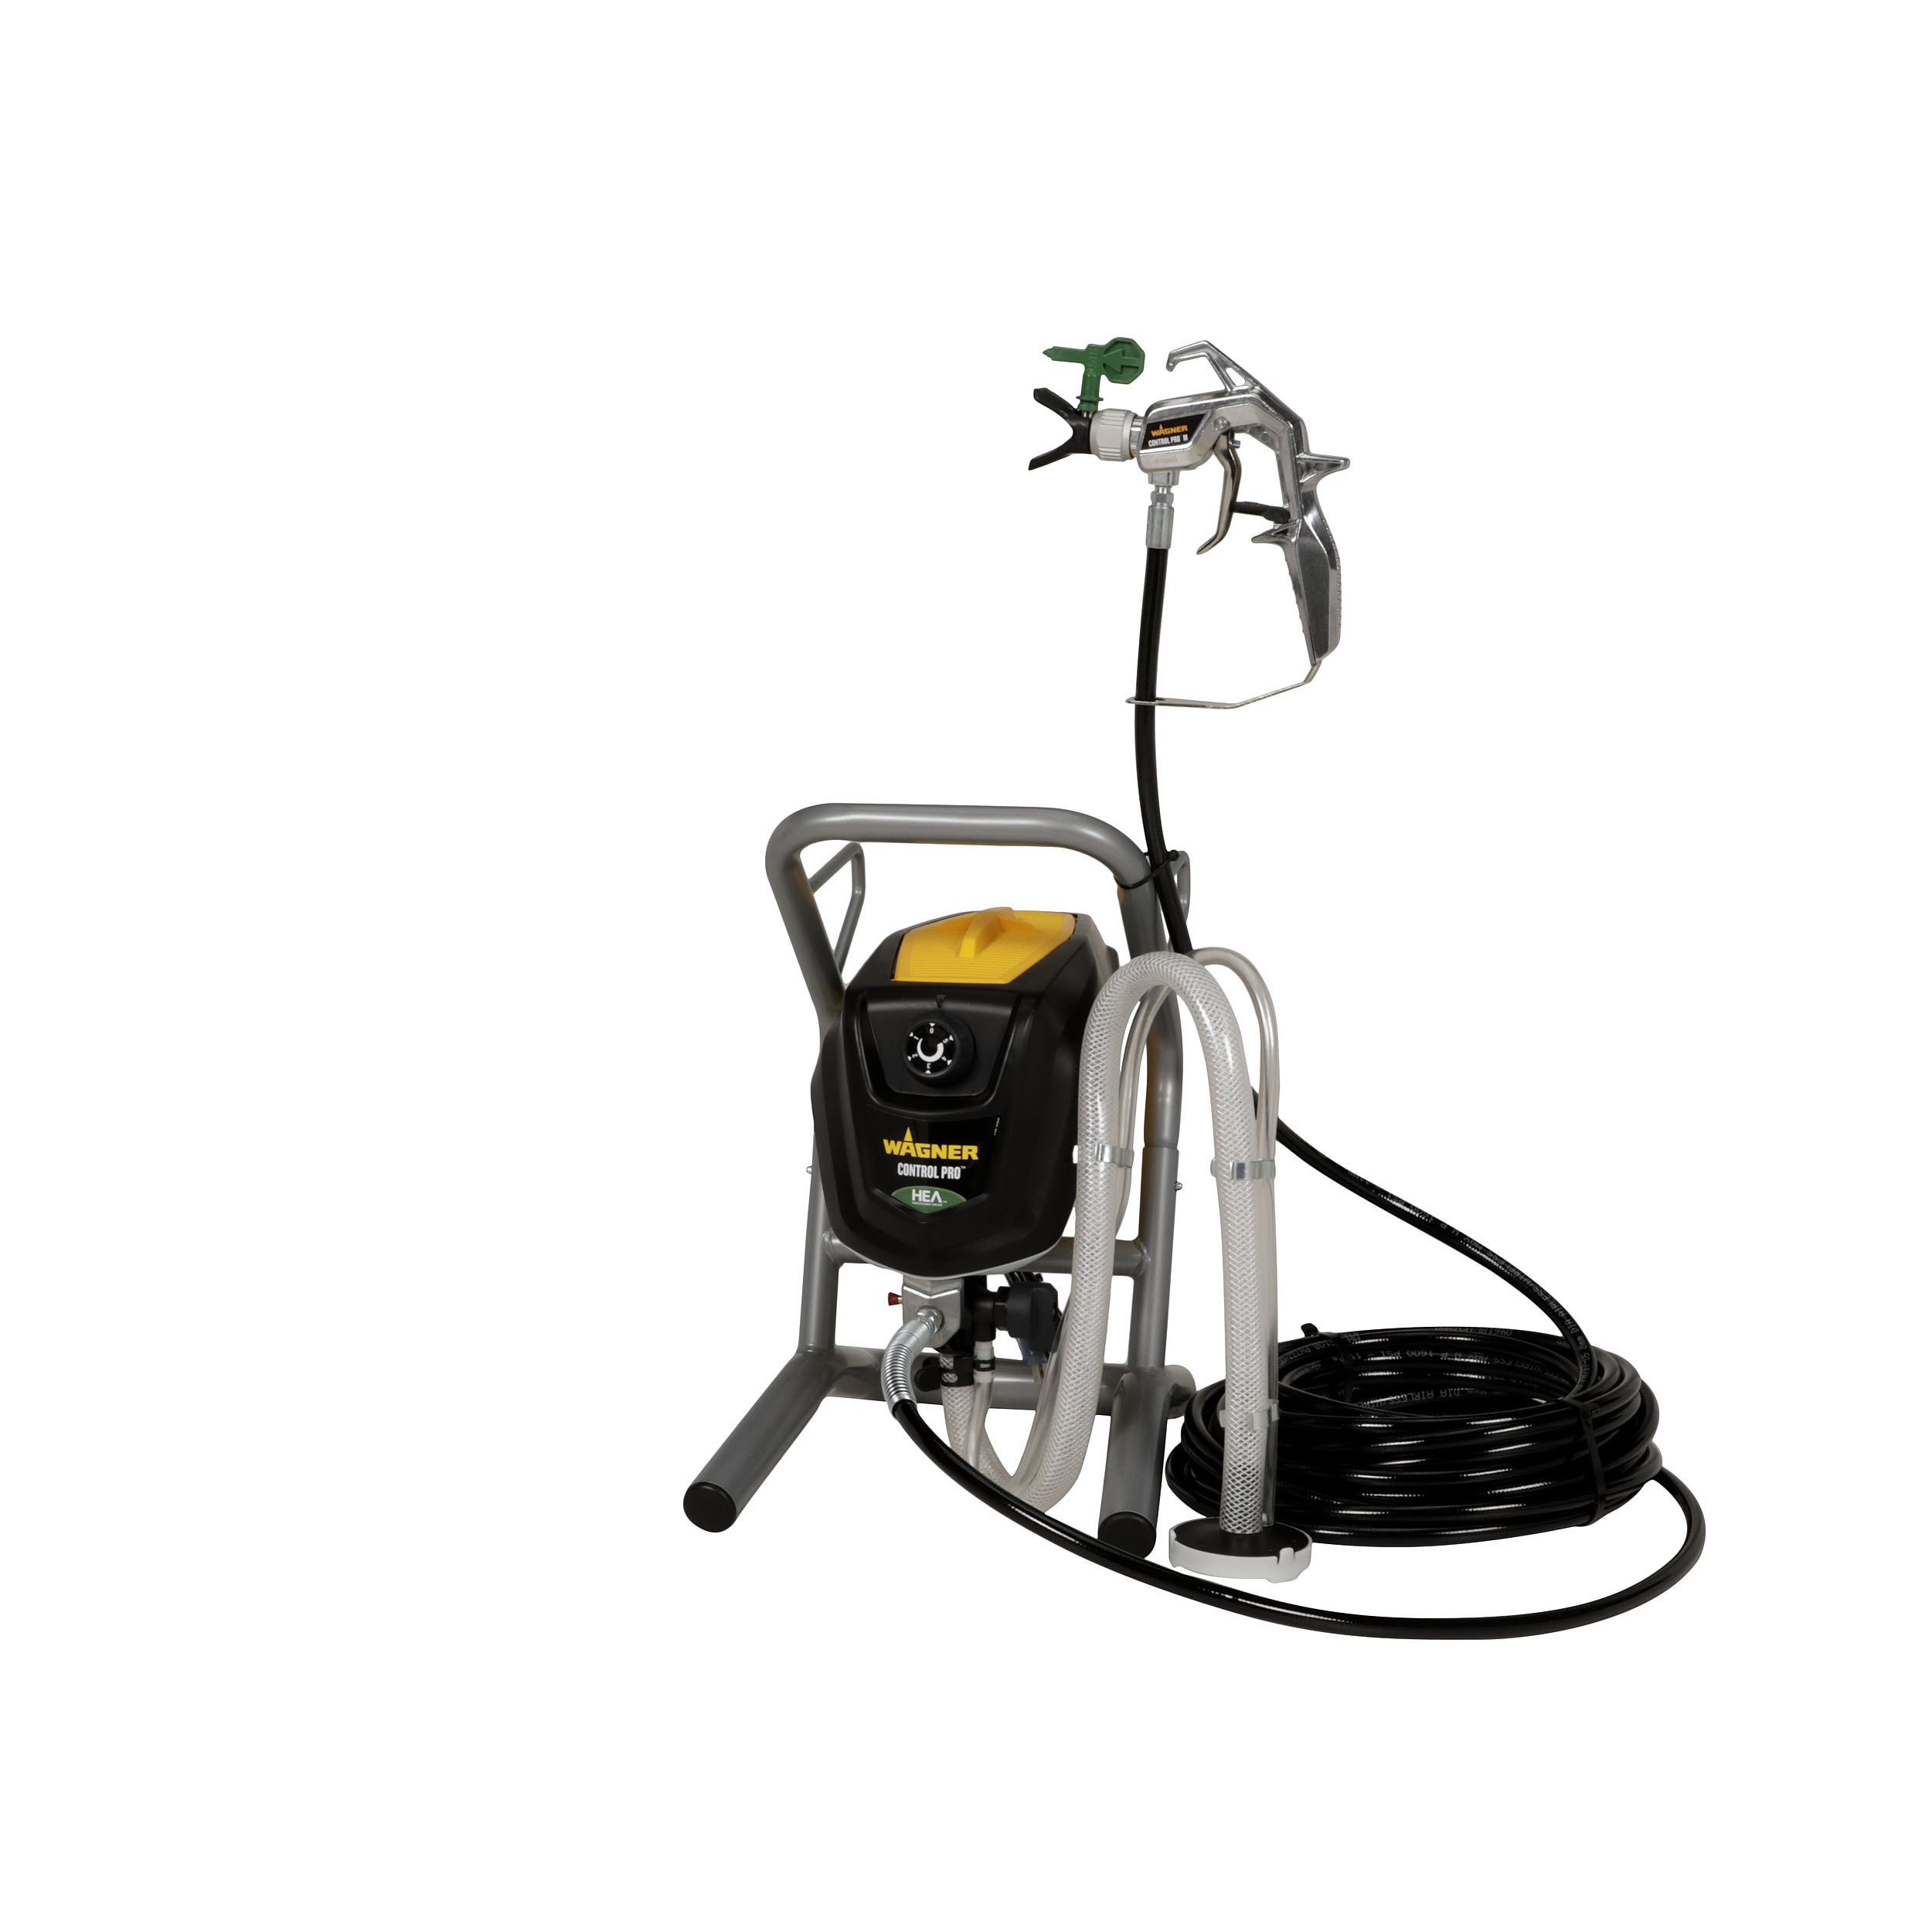 Control Pro 190 Pro High Efficiency Airless Paint and Stain Sprayer